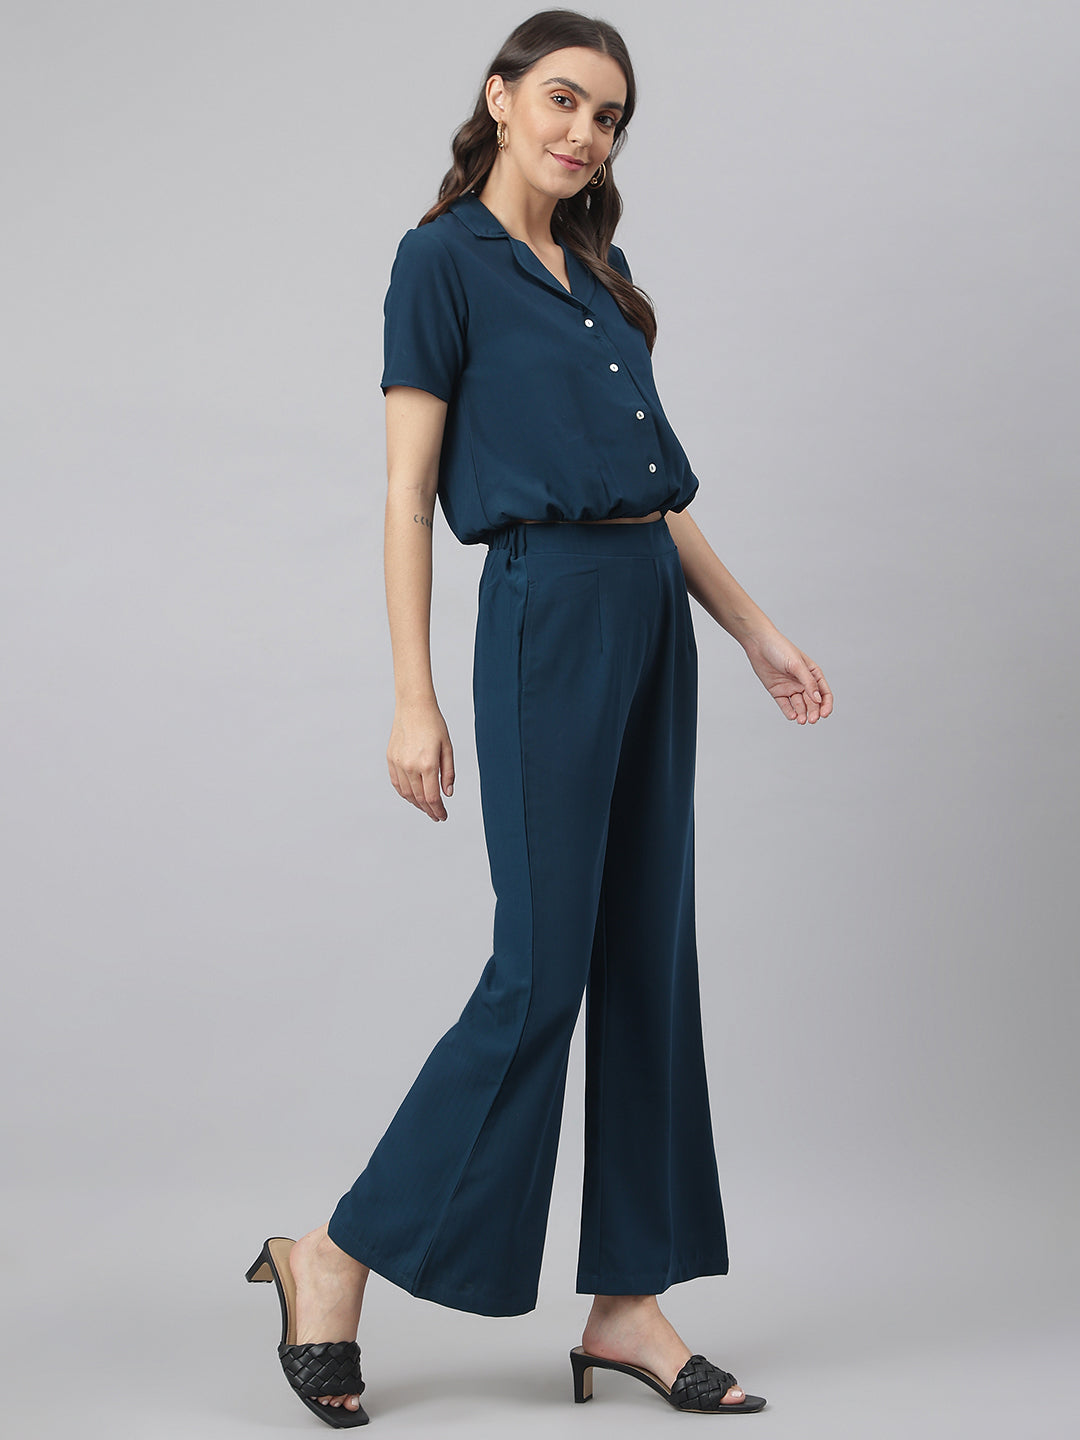 99291 - Navy V Neck Collared Co-ordinate Set With Bell Bottom